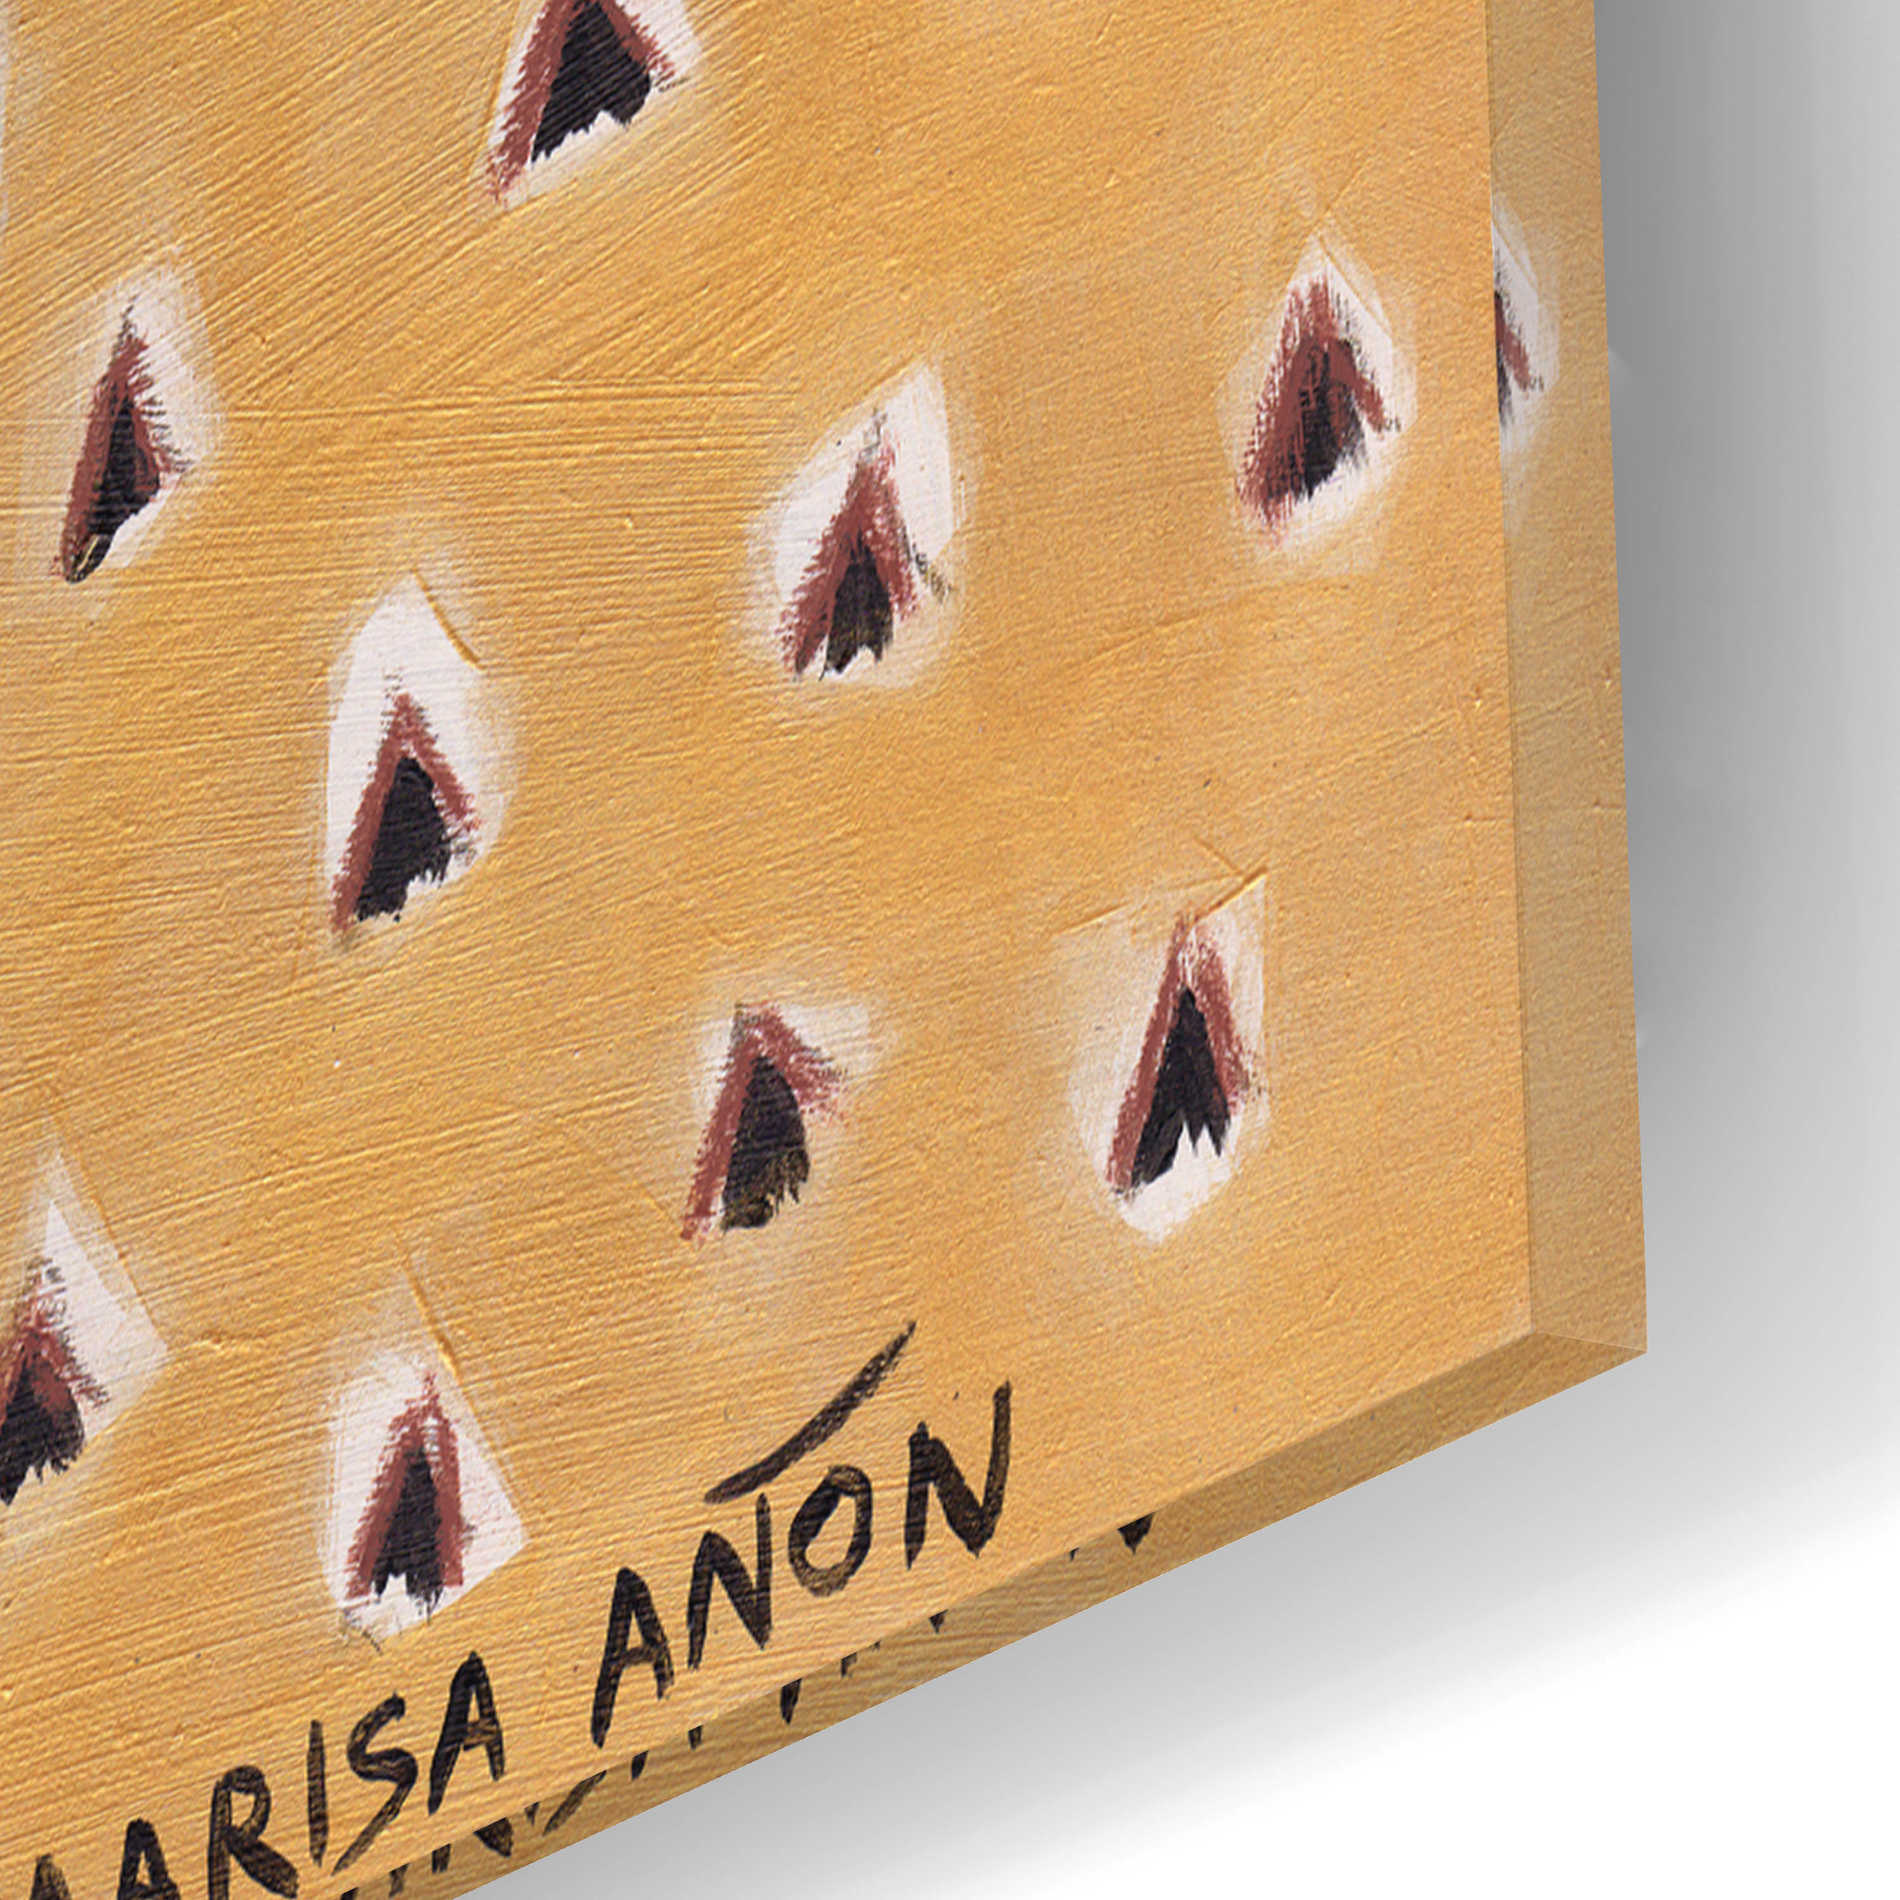 Epic Art 'Gold Tablecloth 4' by Marisa Anon, Acrylic Glass Wall Art,12x16